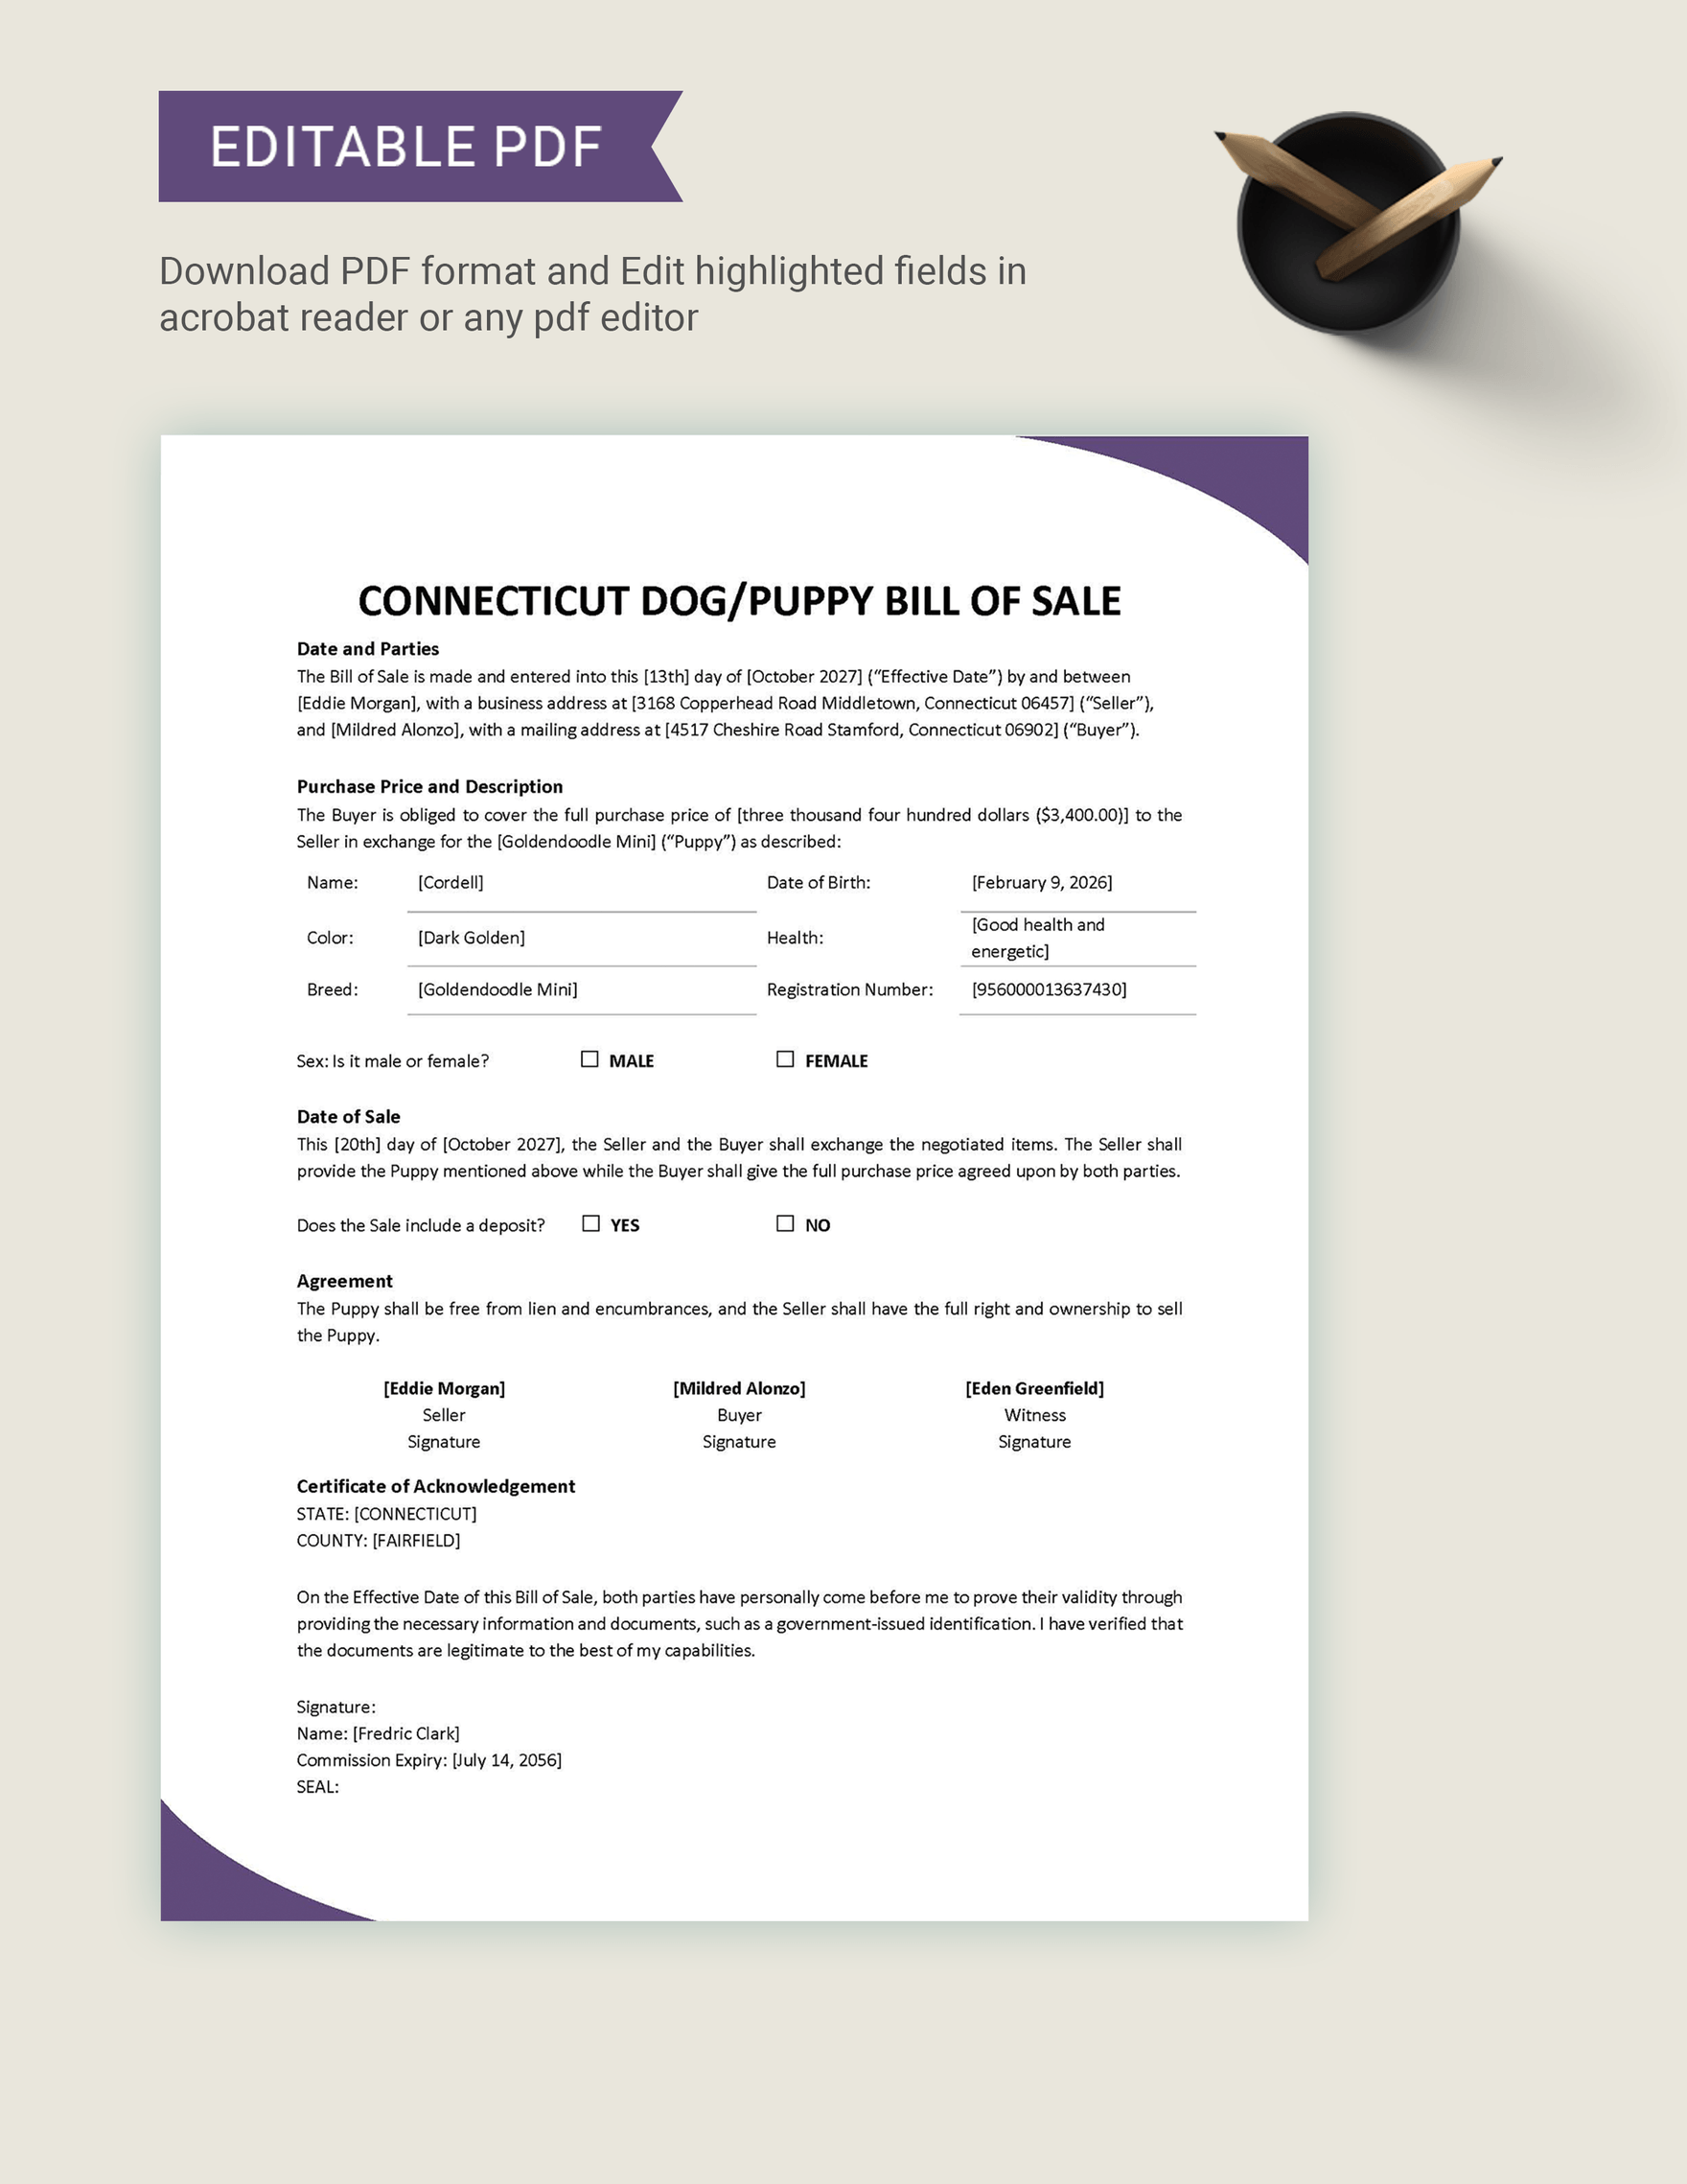 Connecticut Dog / Puppy Bill of Sale Template